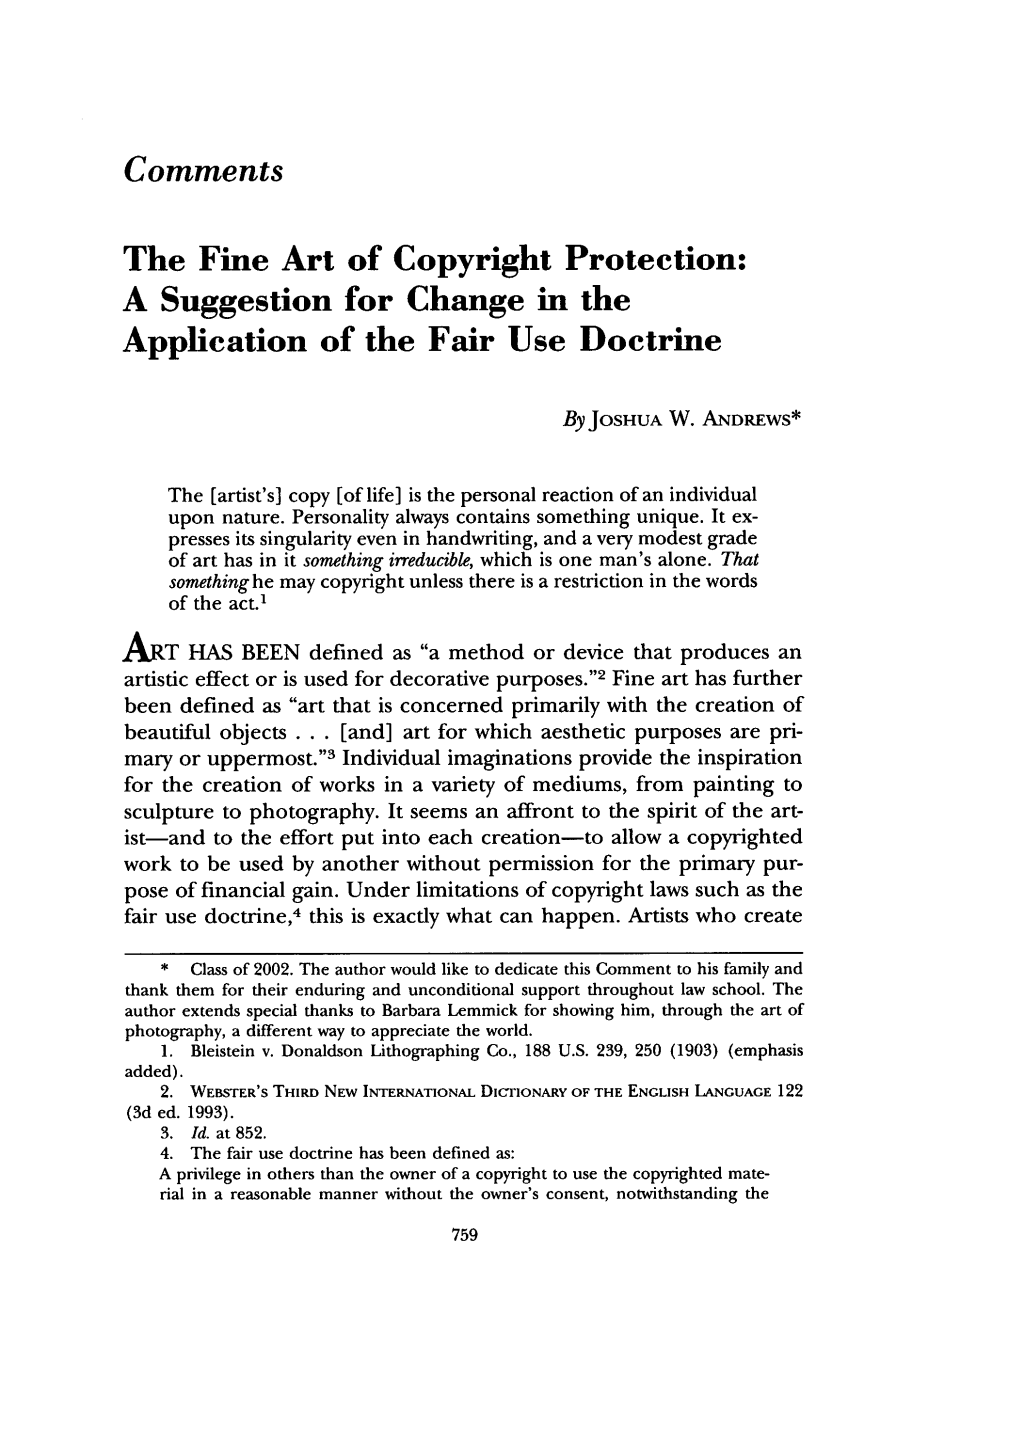 The Fine Art of Copyright Protection: a Suggestion for Change in the Application of the Fair Use Doctrine